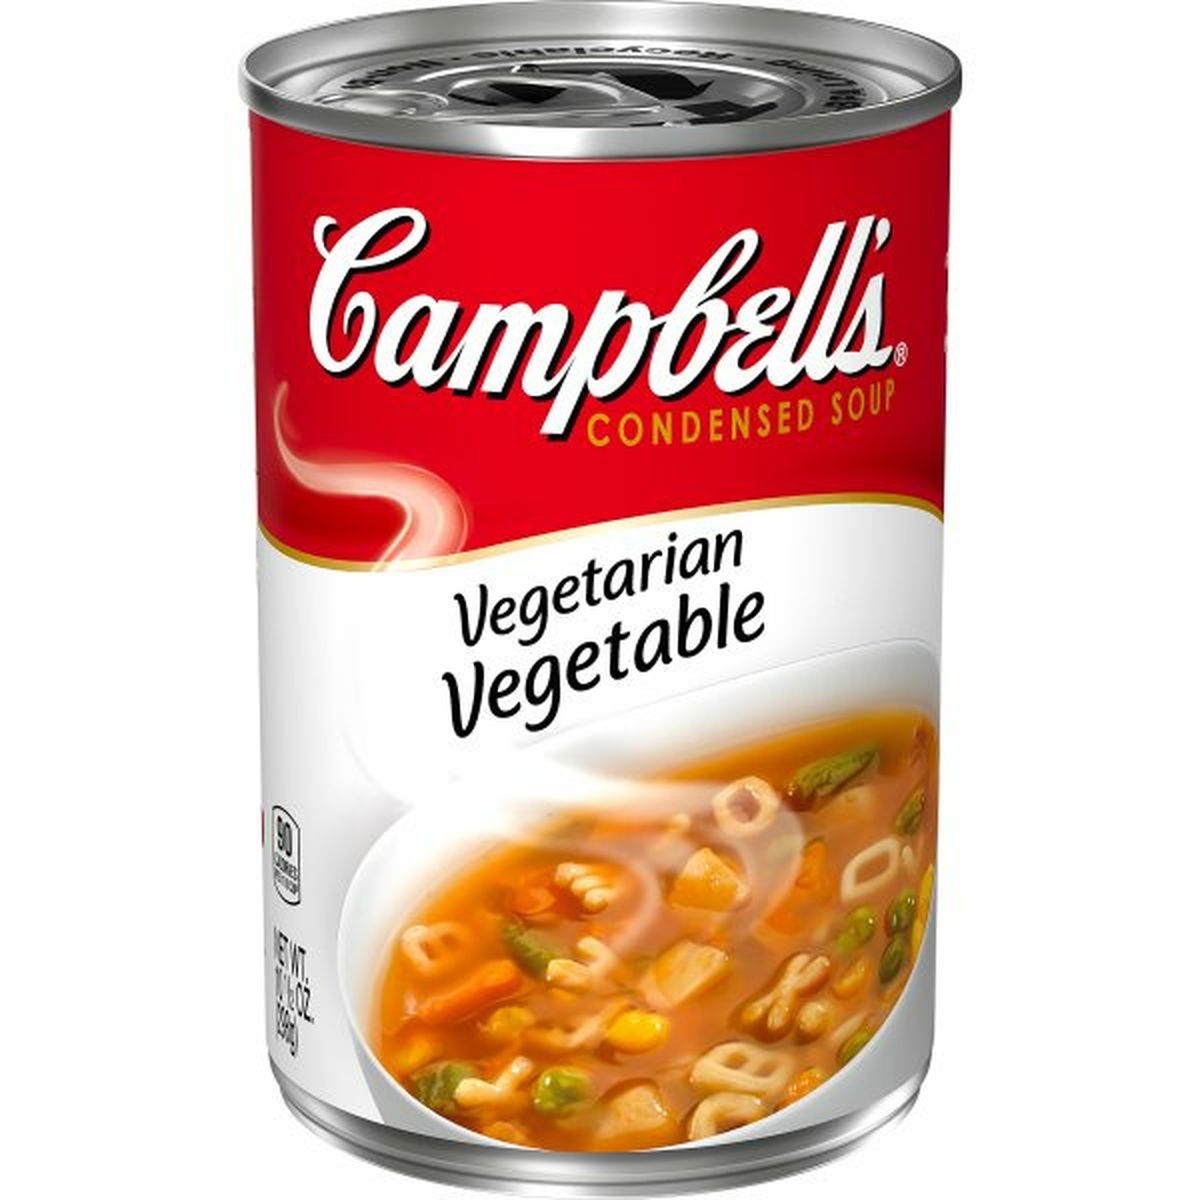 Calories in Campbell'ss Condensed Vegetarian Vegetable Soup